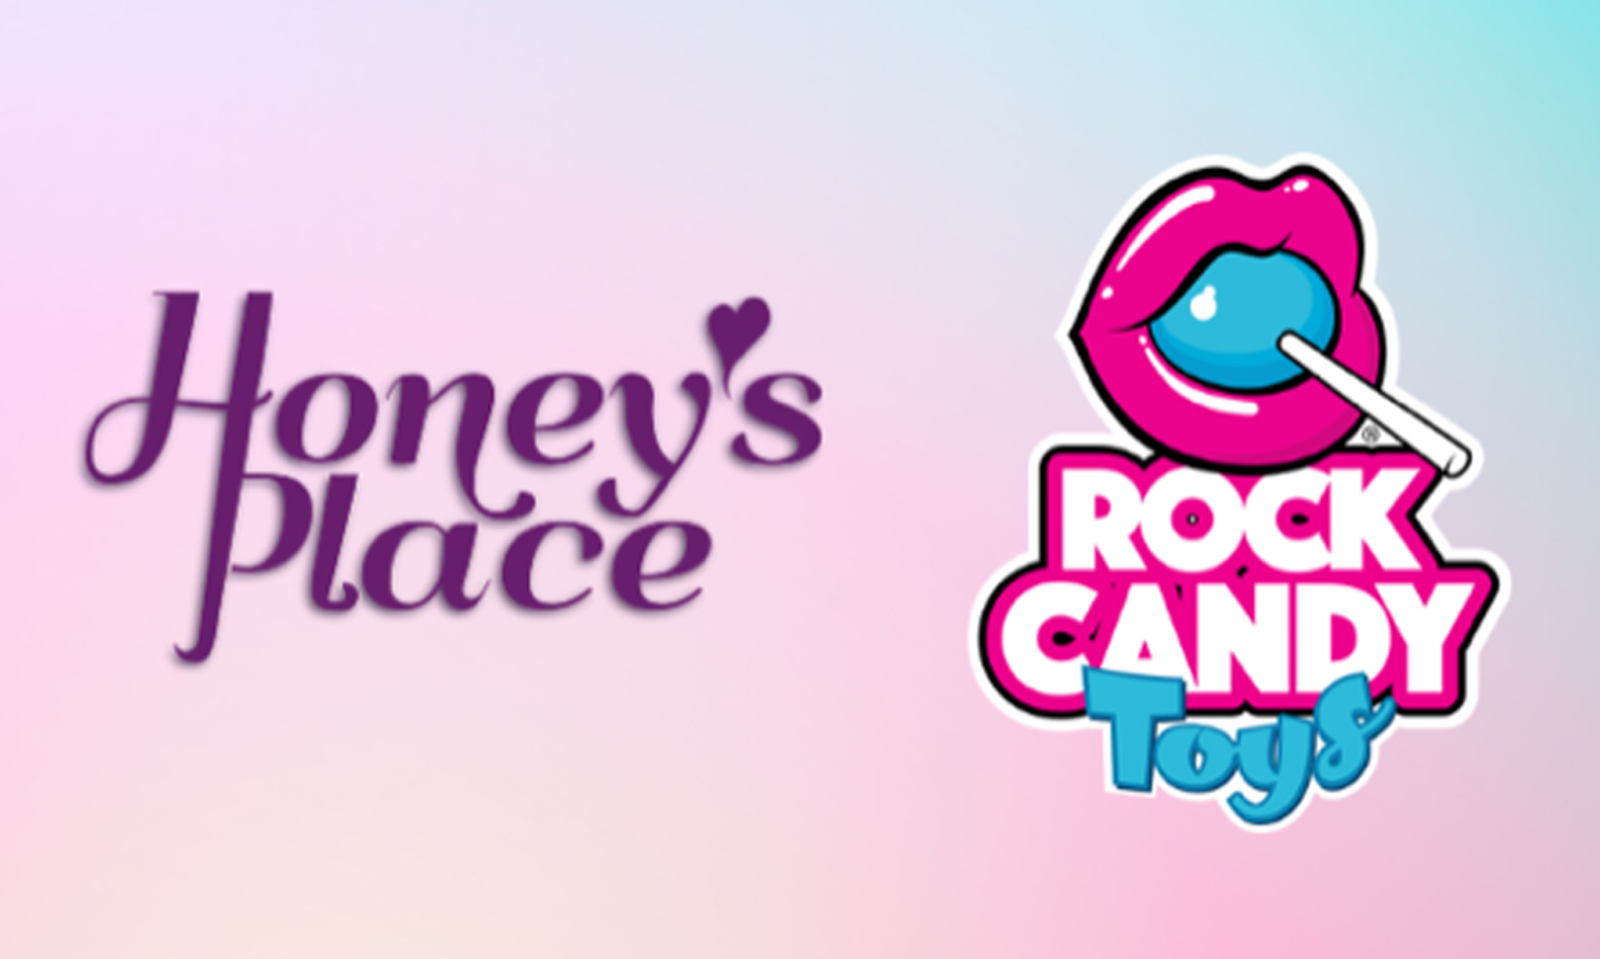 Honey's Place Now Distributing Rock Candy Toys